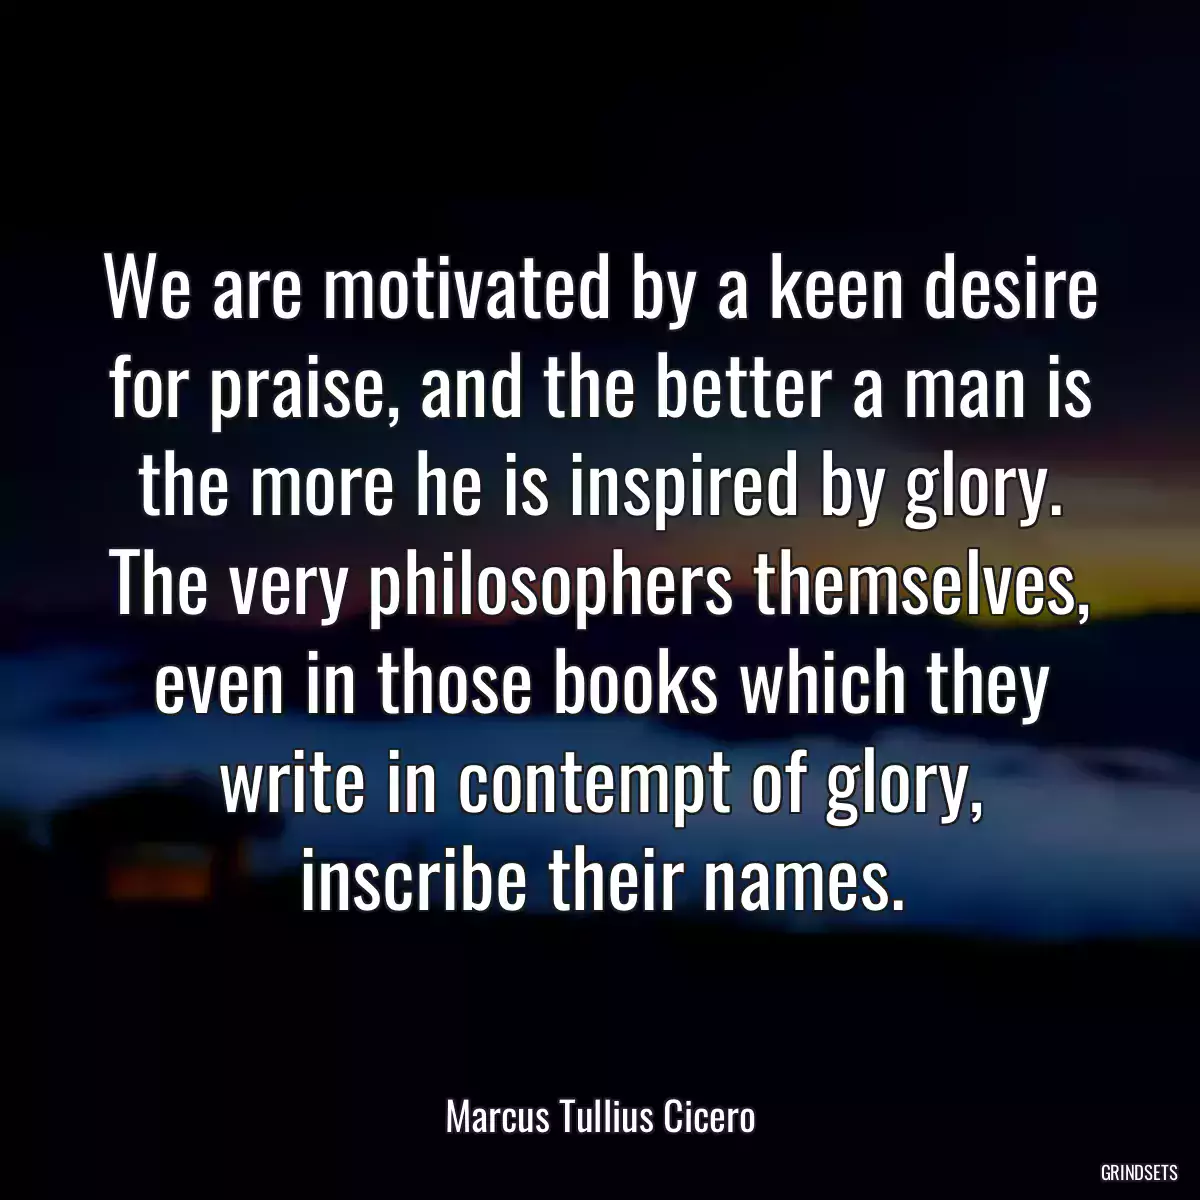 We are motivated by a keen desire for praise, and the better a man is the more he is inspired by glory. The very philosophers themselves, even in those books which they write in contempt of glory, inscribe their names.